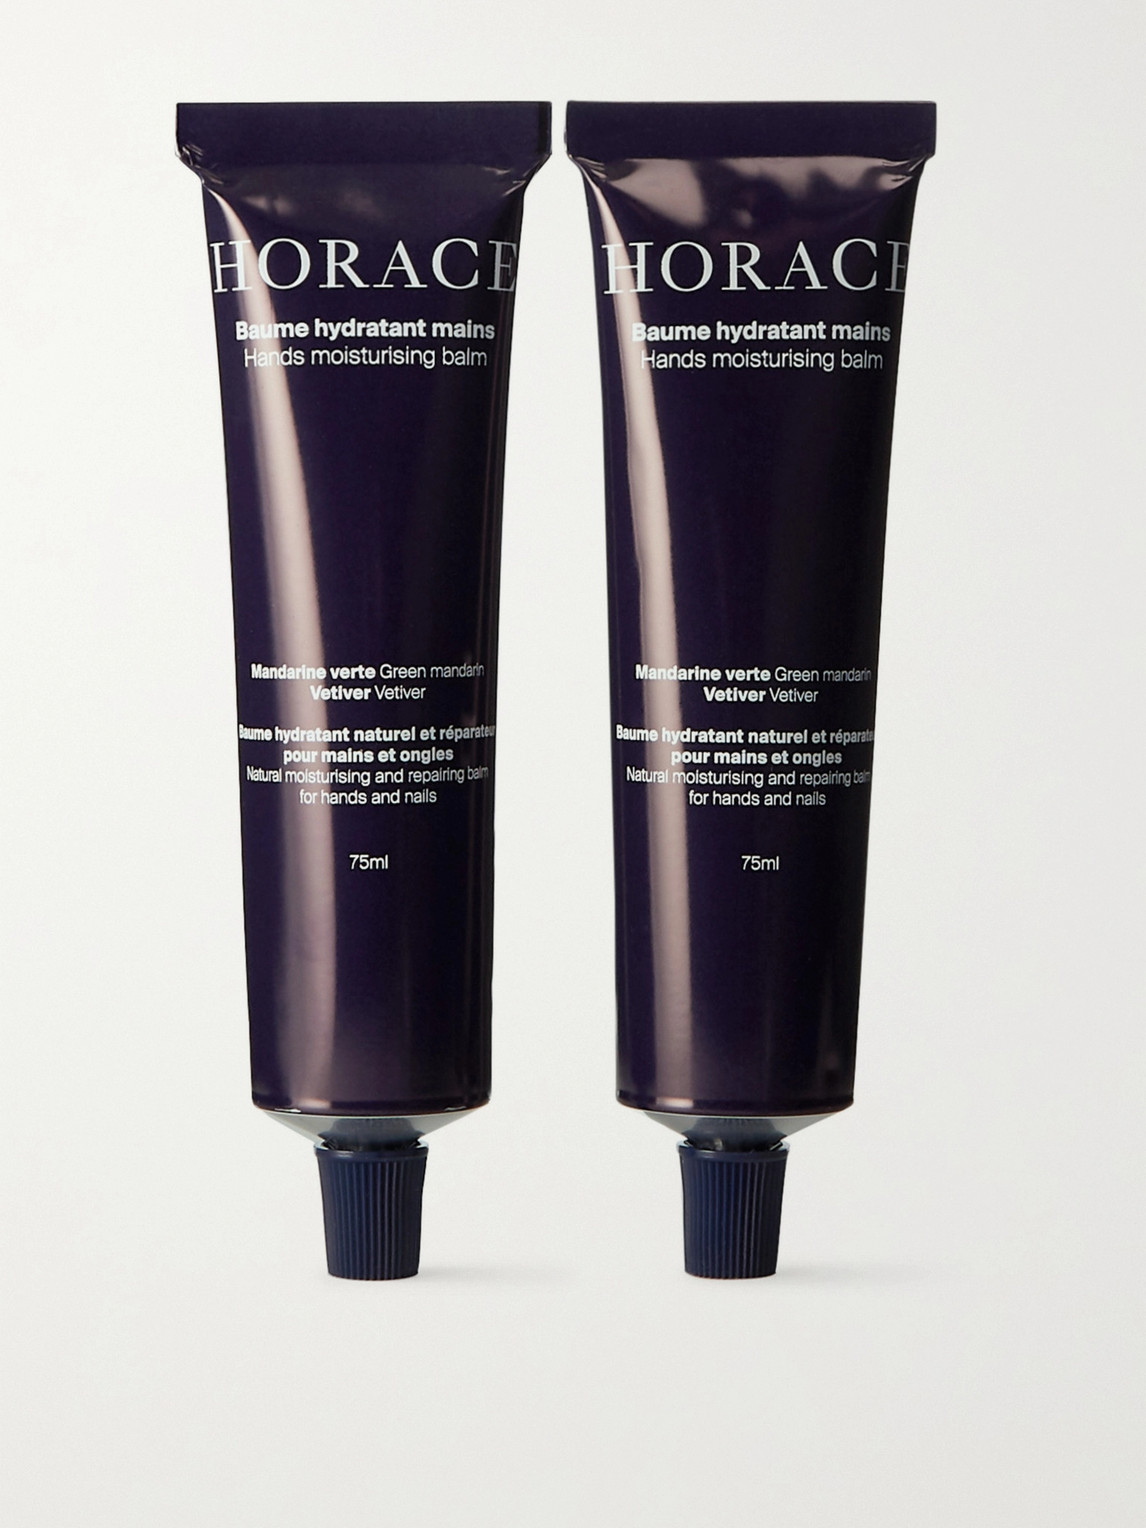 Horace Hands Moisturising Balm Duo, 2 X 75ml In Colorless